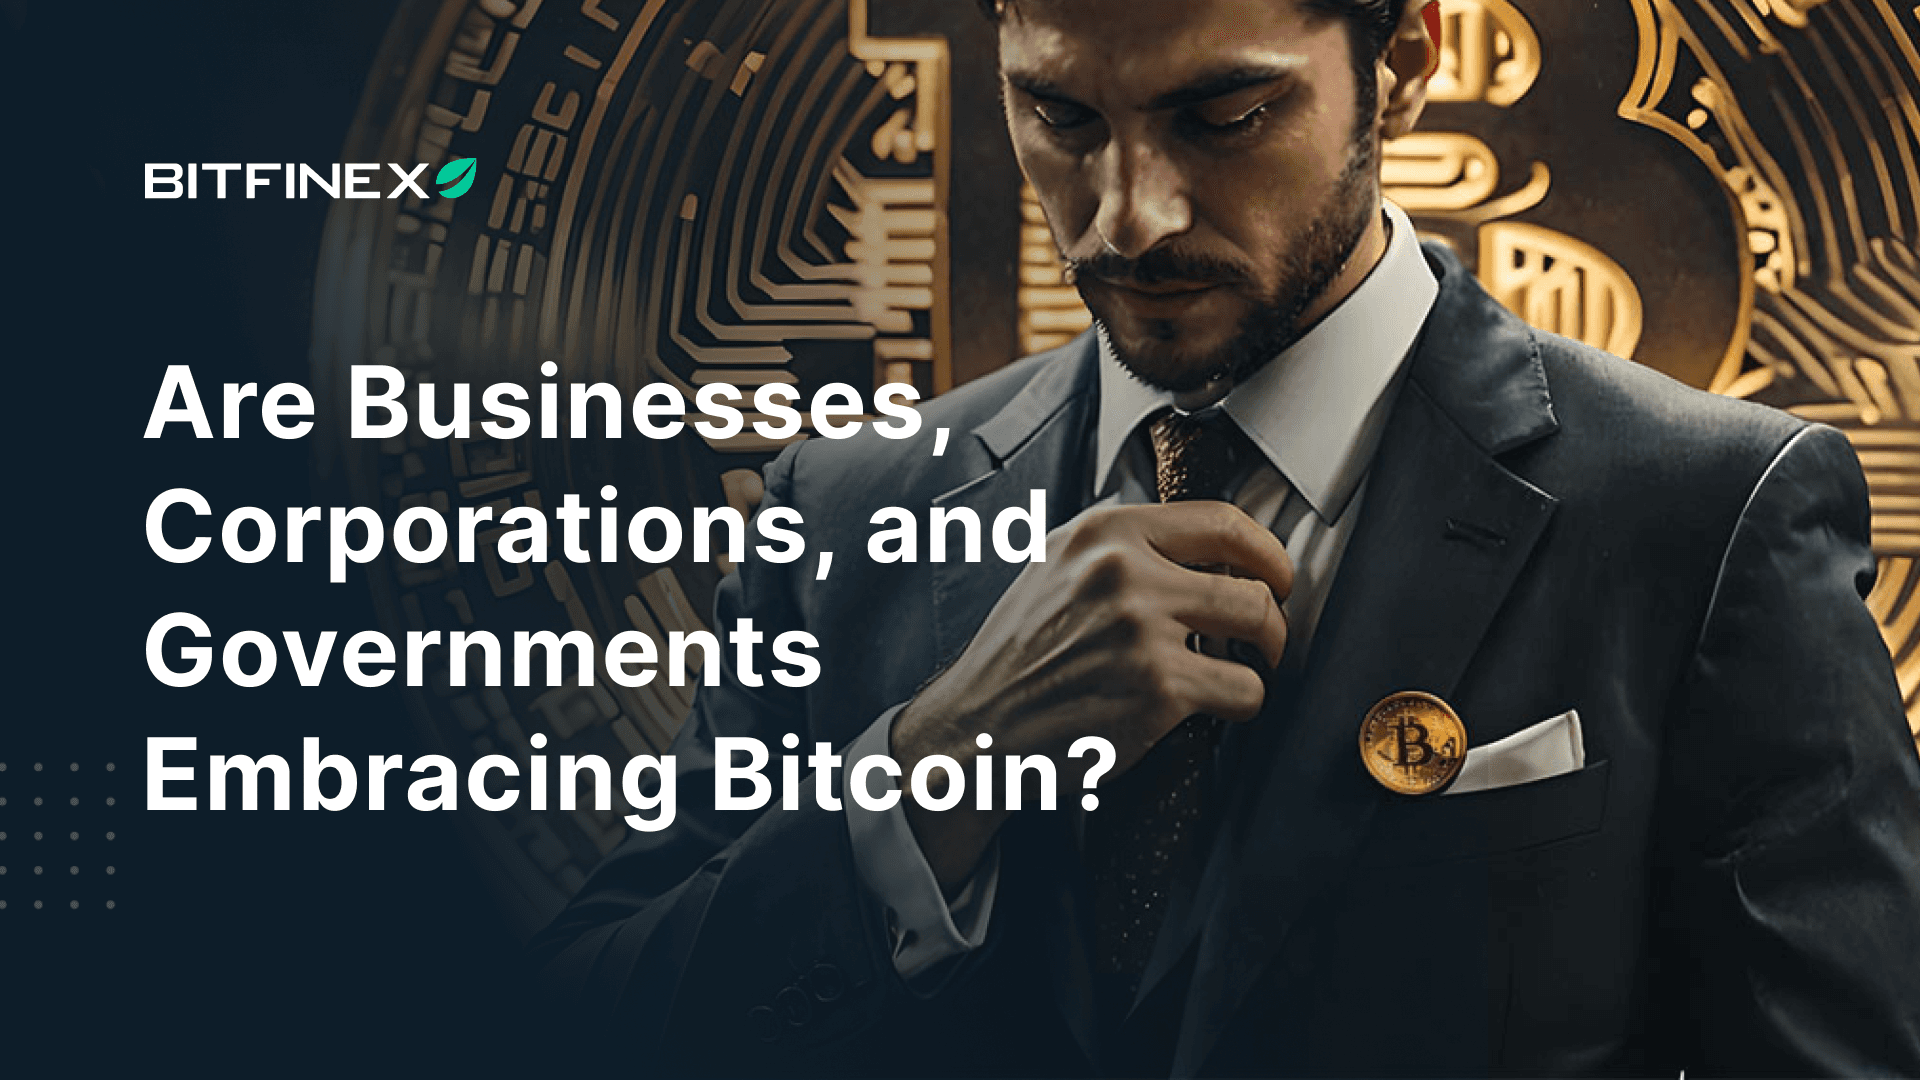 Are Businesses, Corporations, and Governments Embracing Bitcoin?